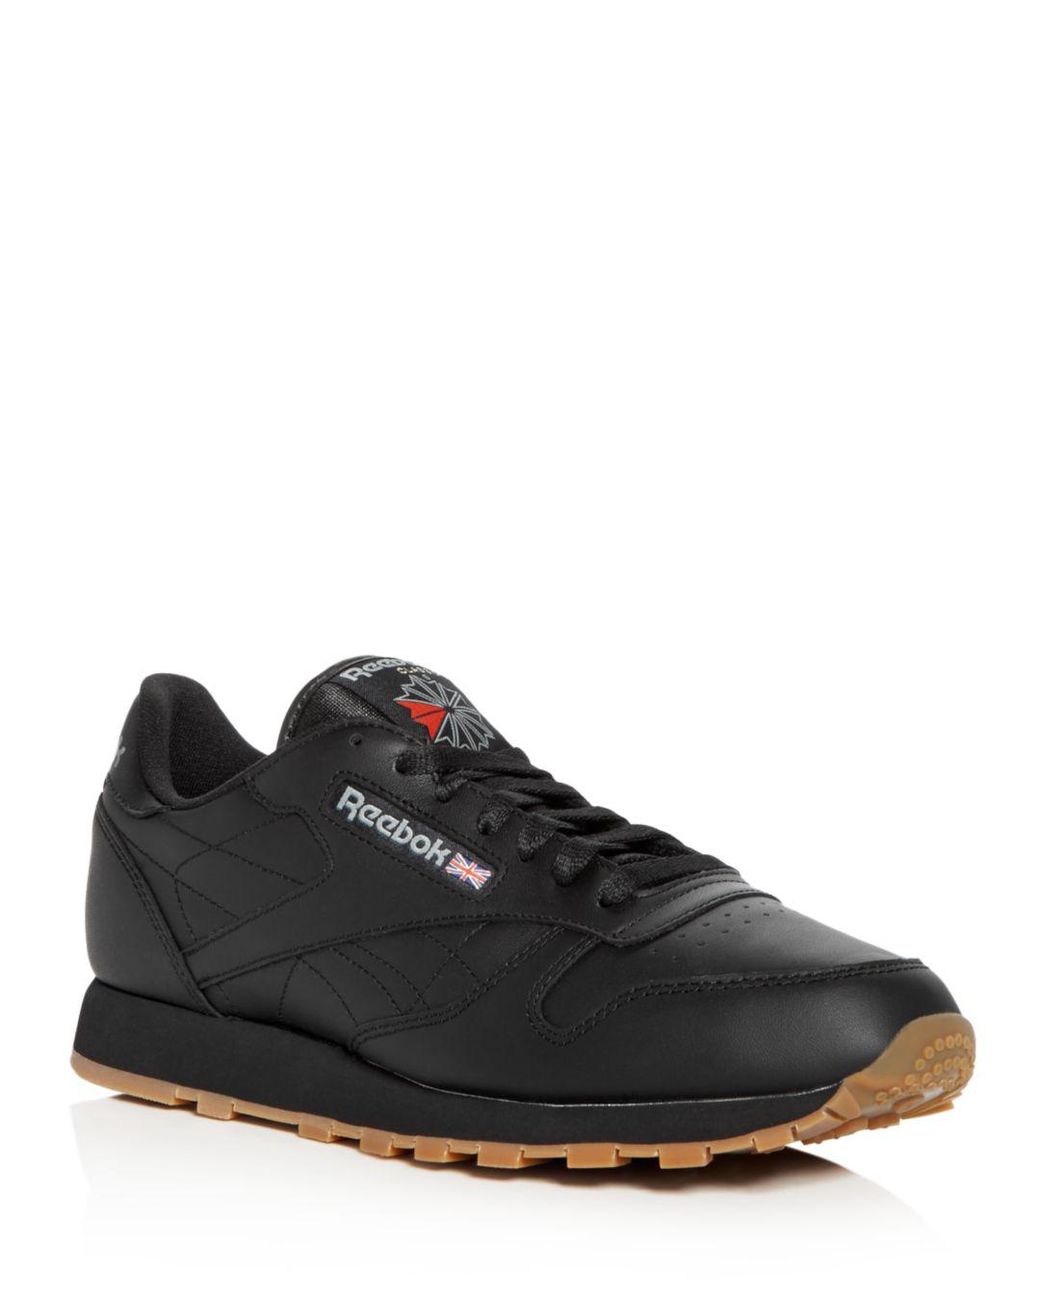 reebok men's classic leather lace up trainers sports shoes